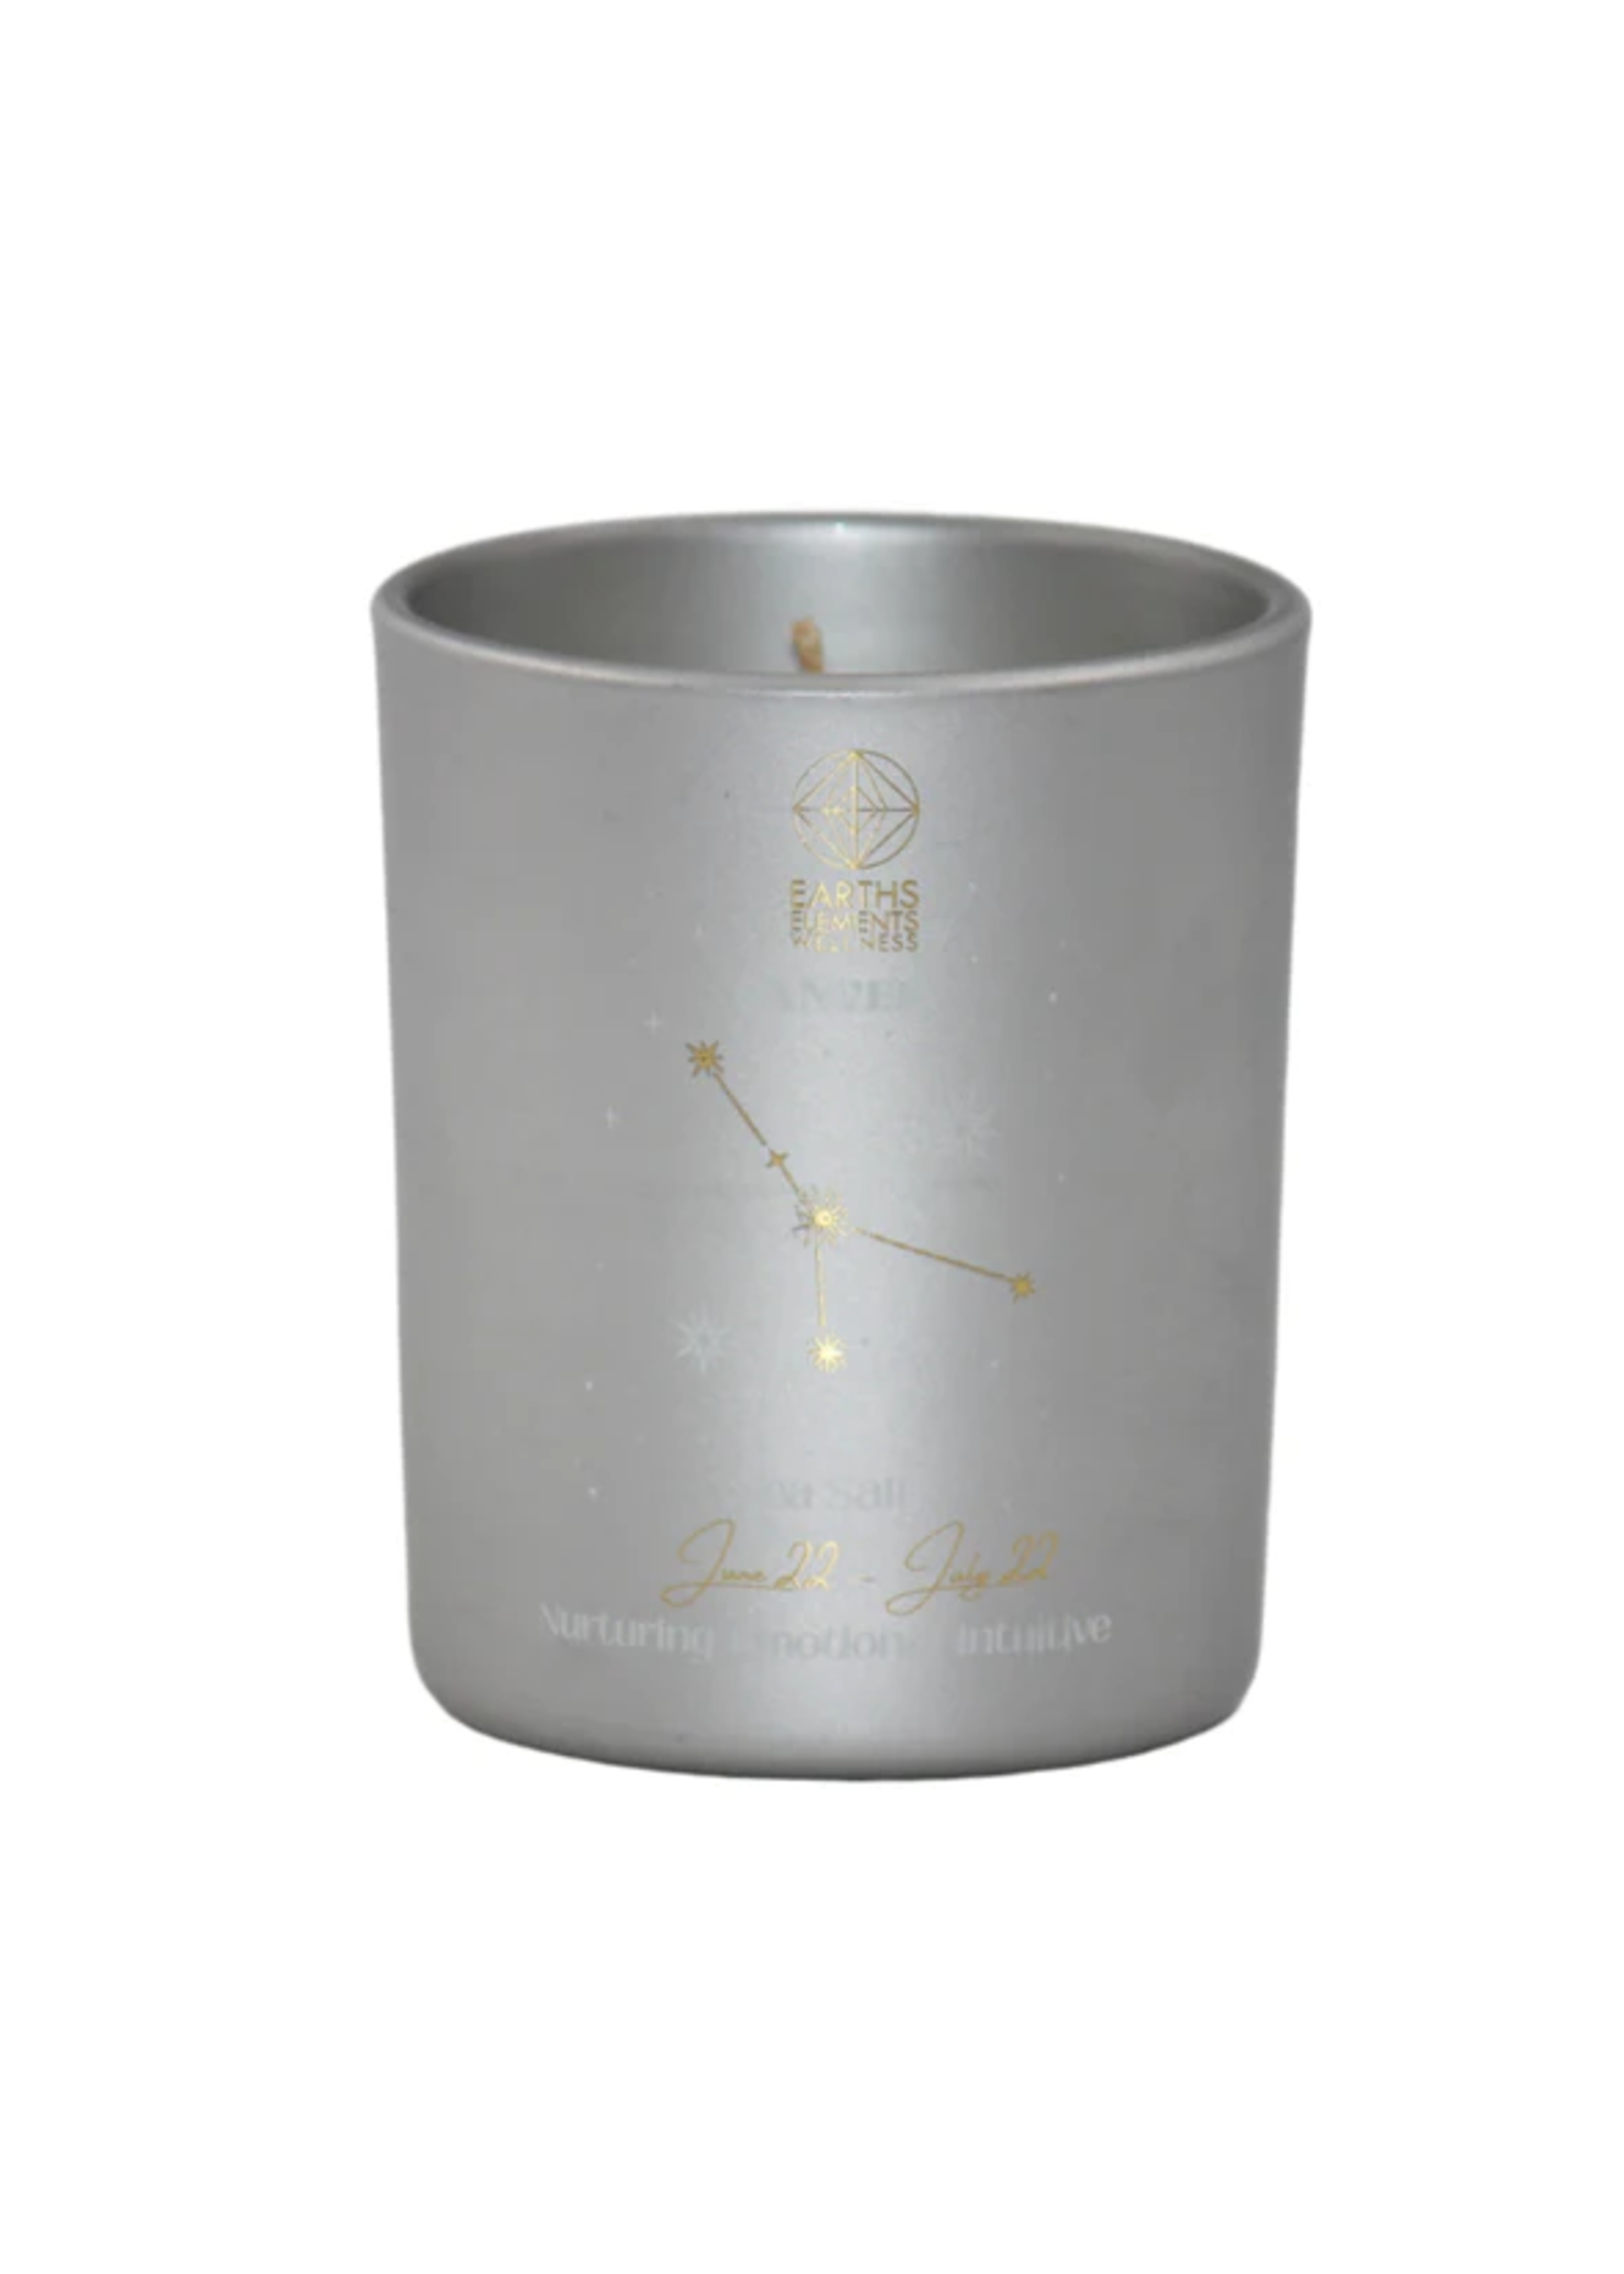 Earths Elements Cancer Zodiac Candle